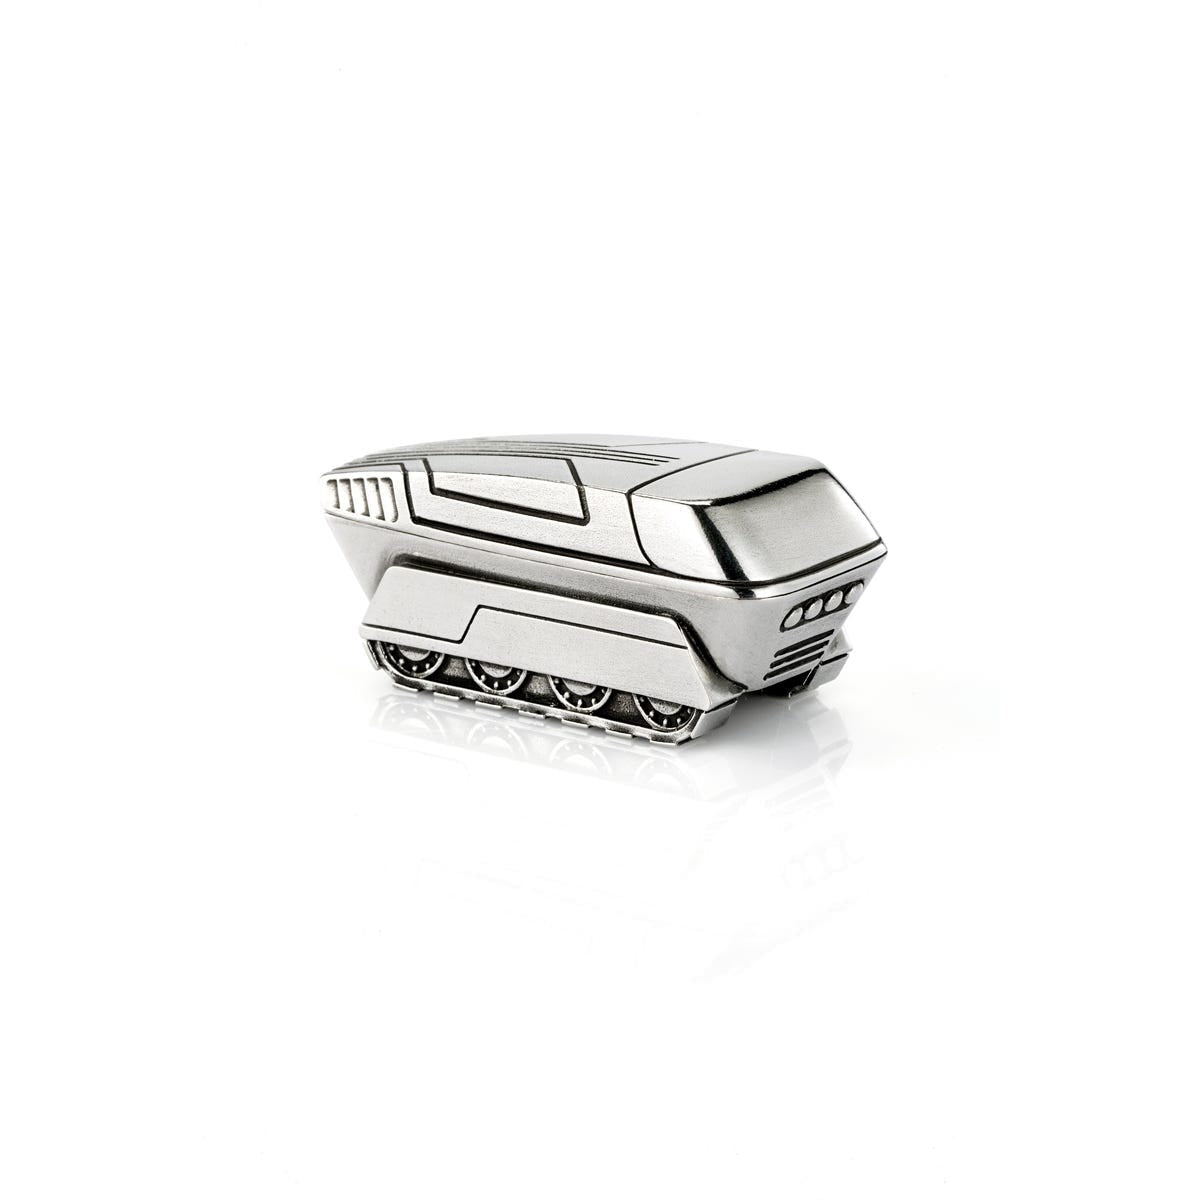 Royal Selangor Rover Container Ornament - Pewter - Notbrand